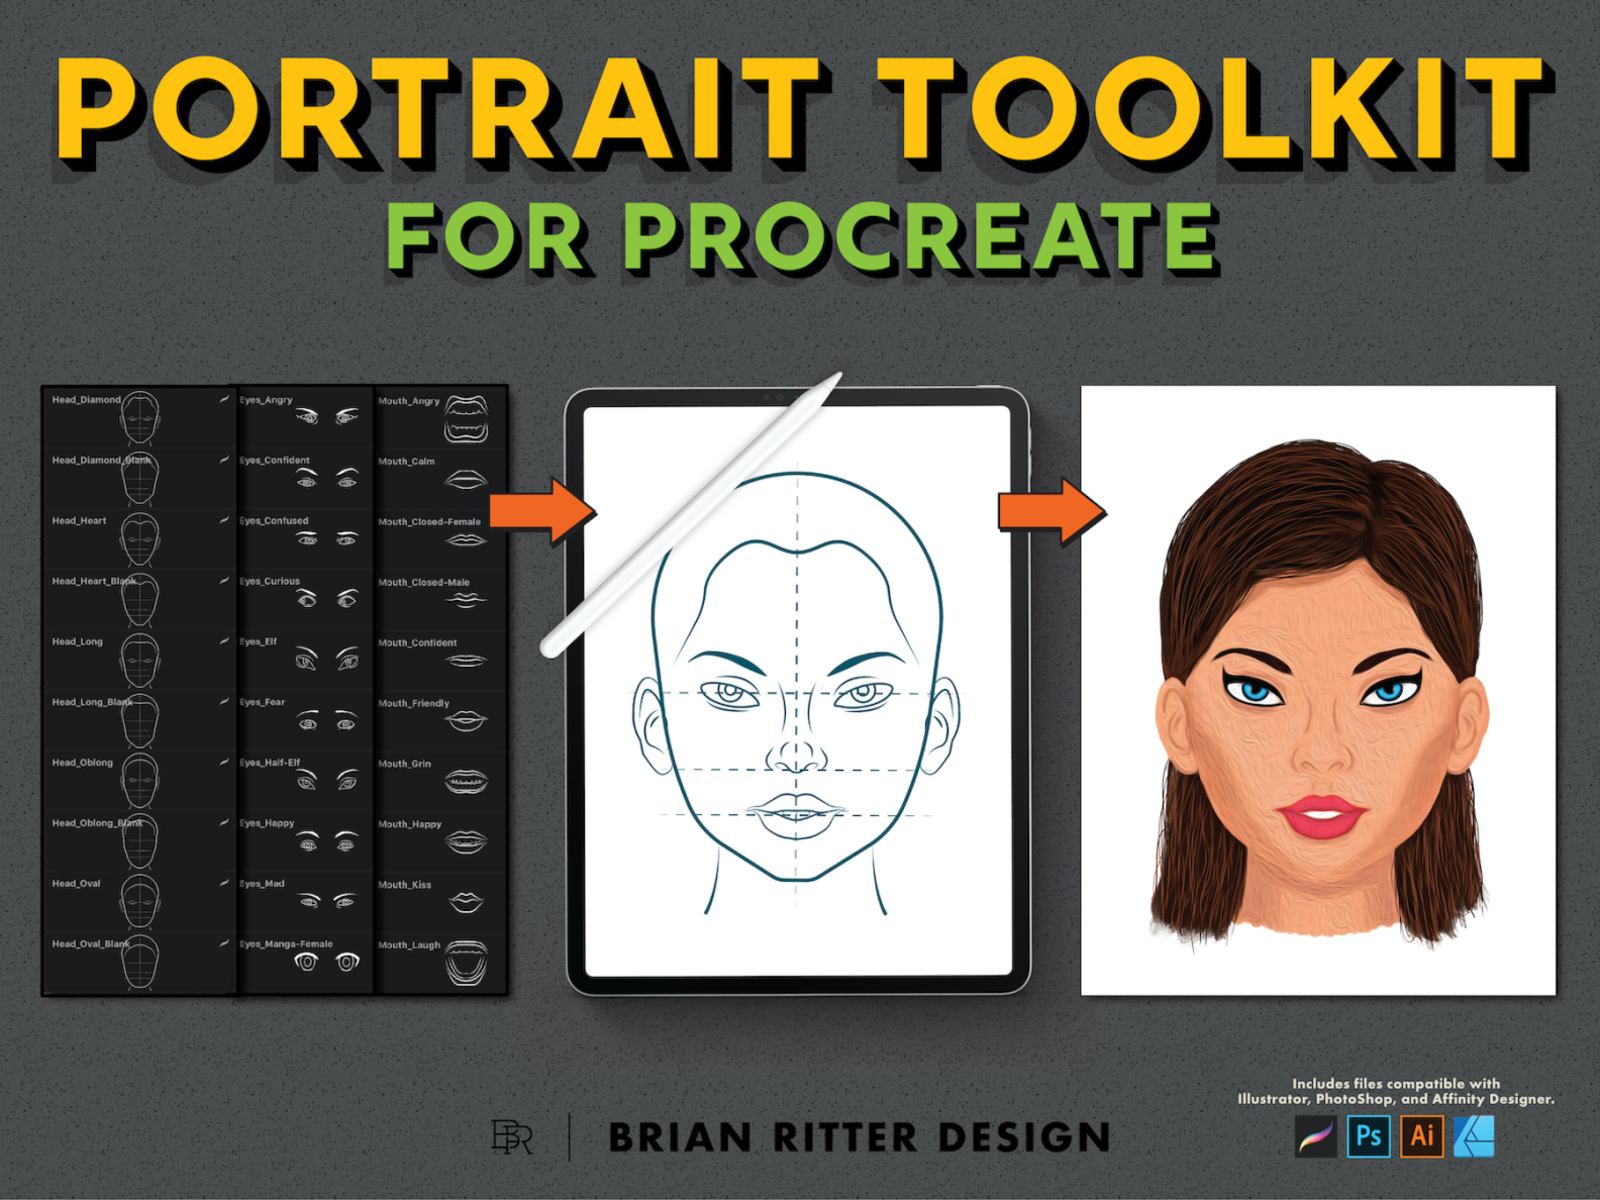 Portrait Toolkit_BRD_1-18-20 affinity designer avatar brushes character drawing drawing aid illustration illustrator photoshop portrait portrait painting procreate procreate brushes